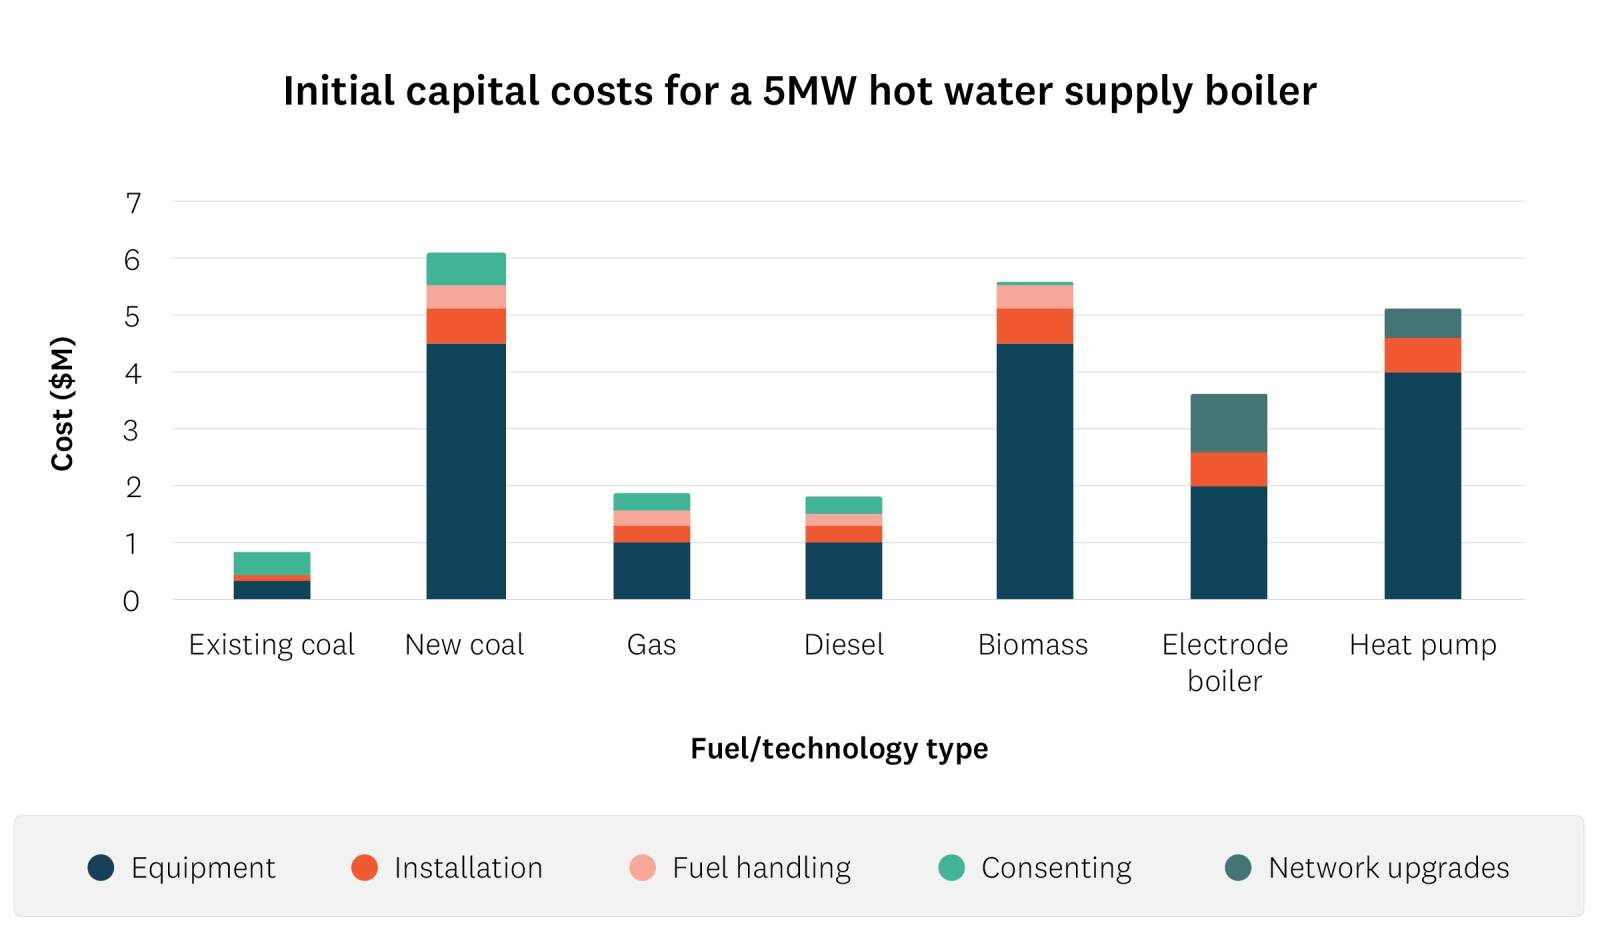 Bar graph showing initial capital costs for a 5MW hot water supply boiler by fuel/technology type. 